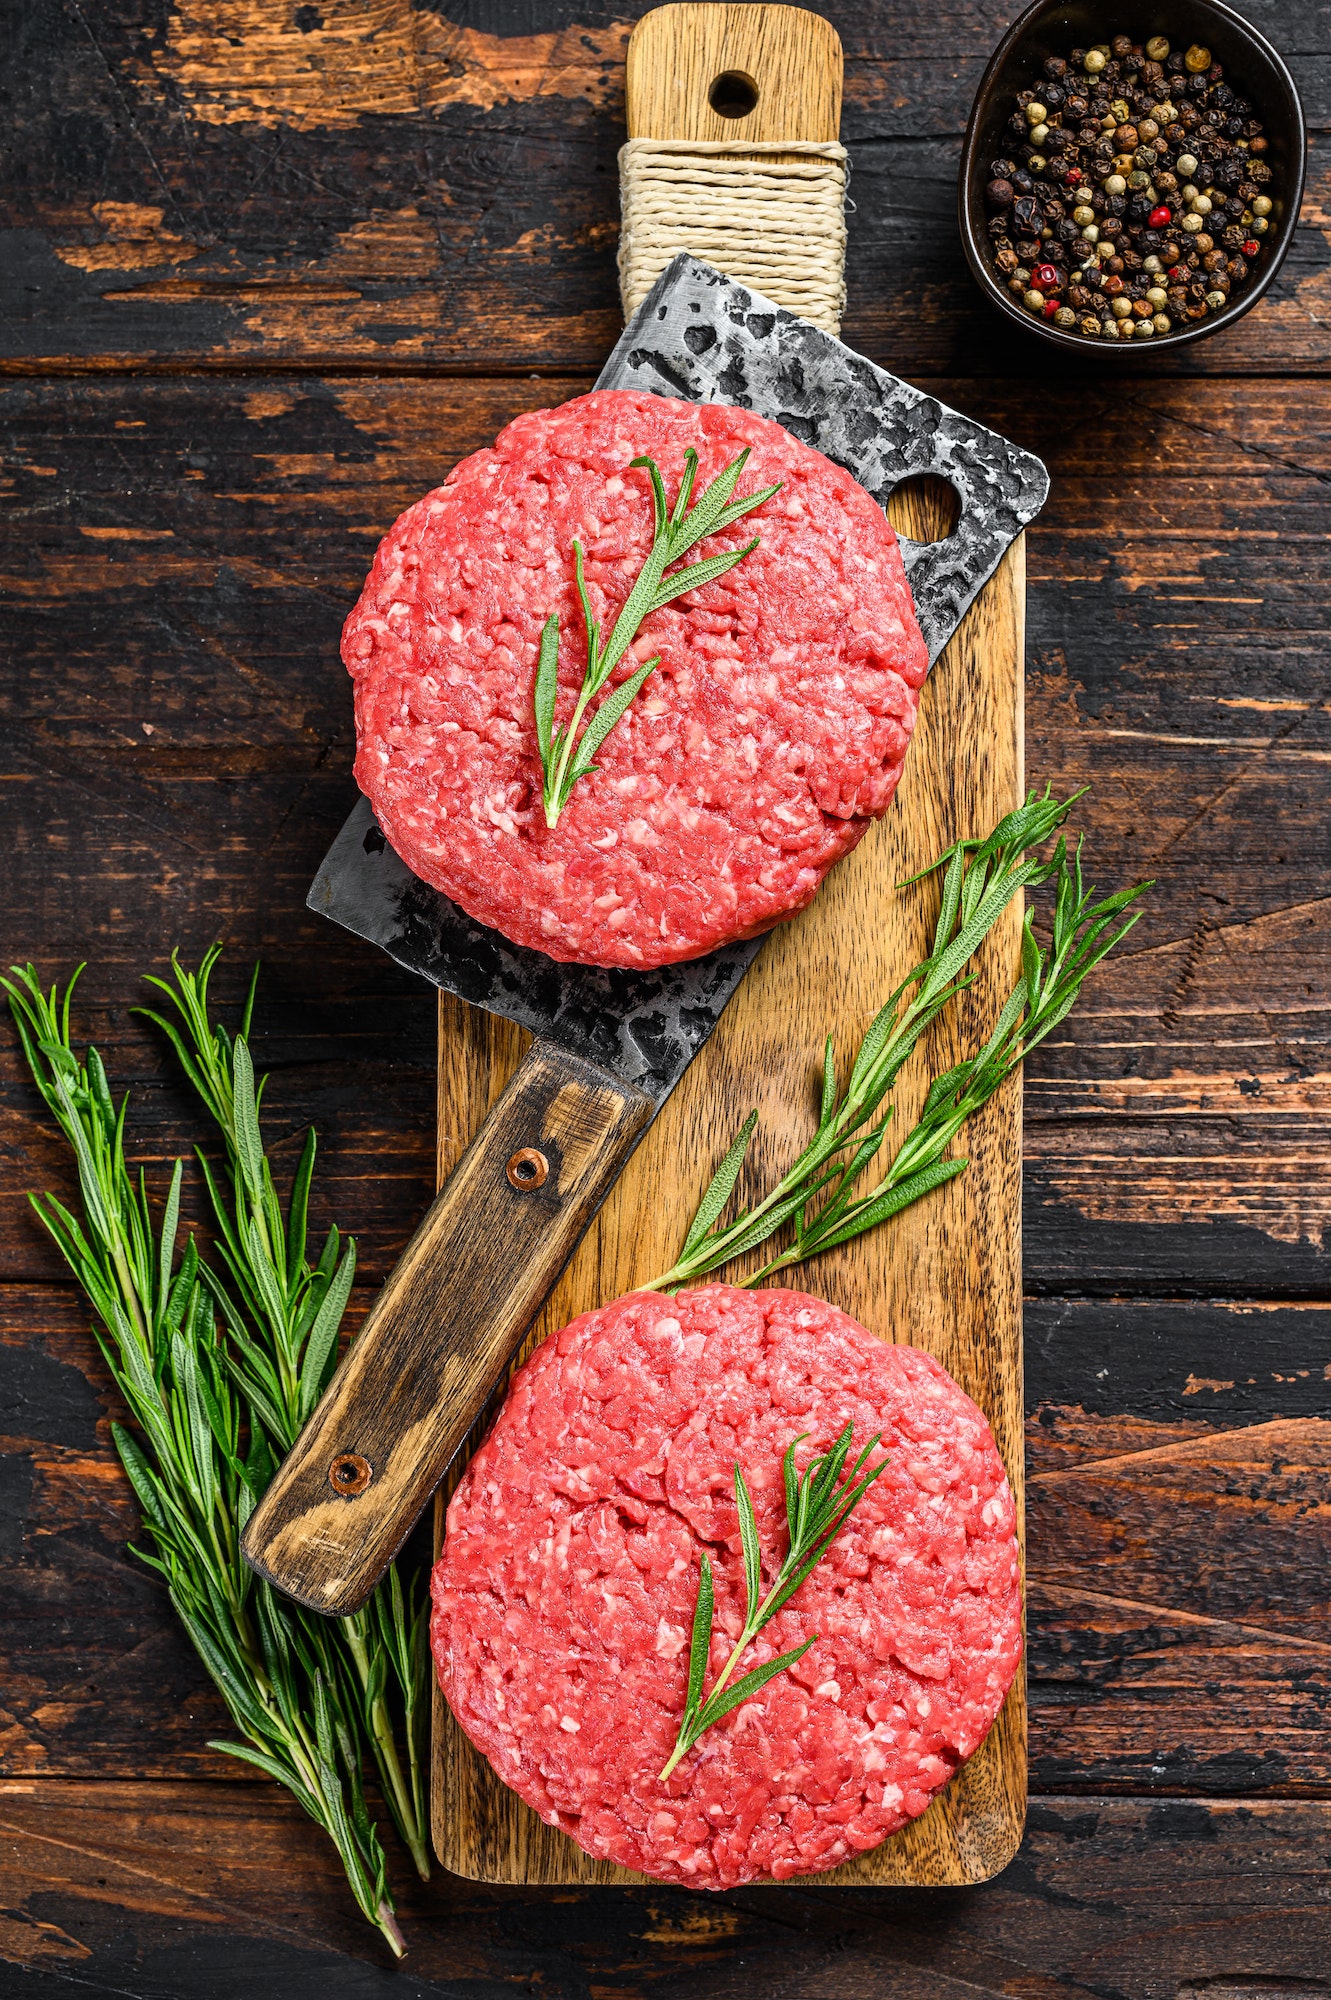 Ground raw meat patties. Meat cutlet ready to cook. Farm organic meat.